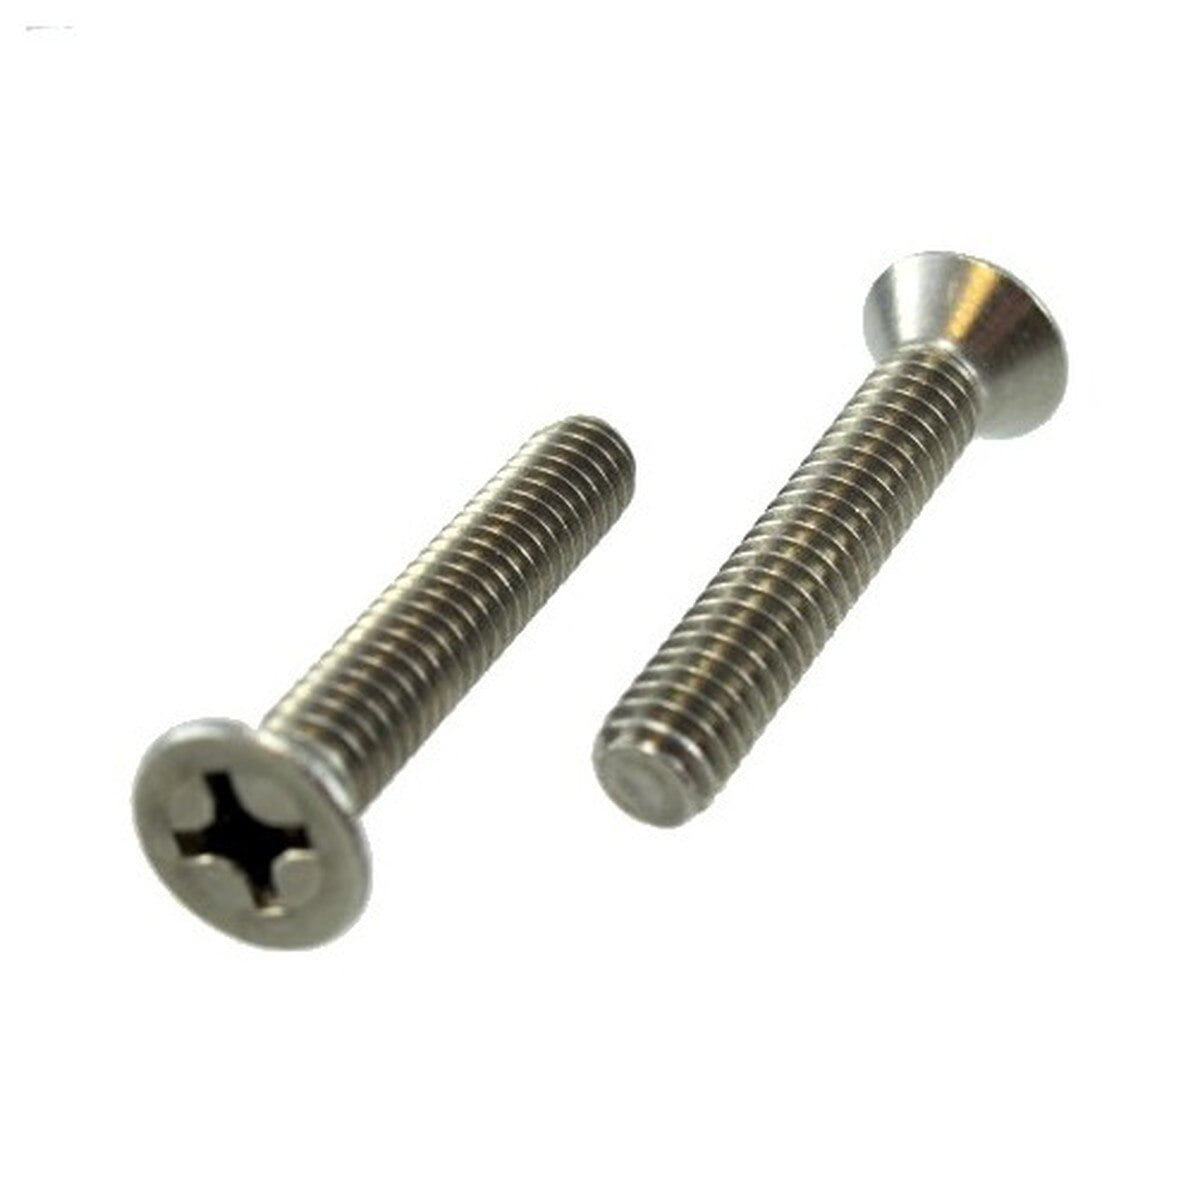 Pan Head Phillips Machine Screw #2-56 x 1" 304 A2 18-8 Stainless Steel 